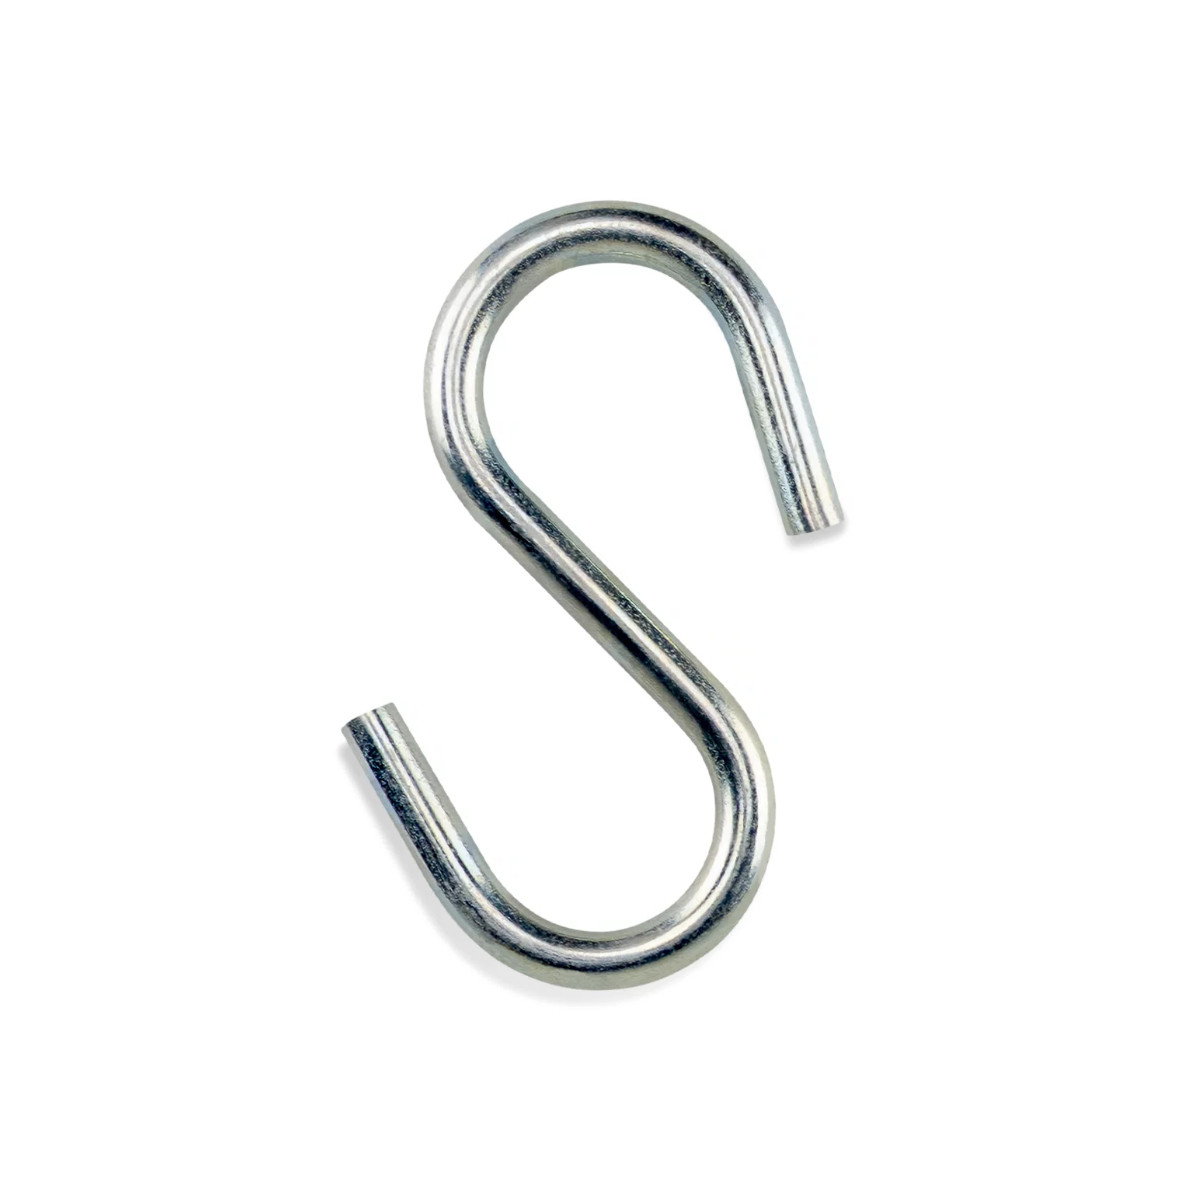 Commercial S-Hooks Made in the USA